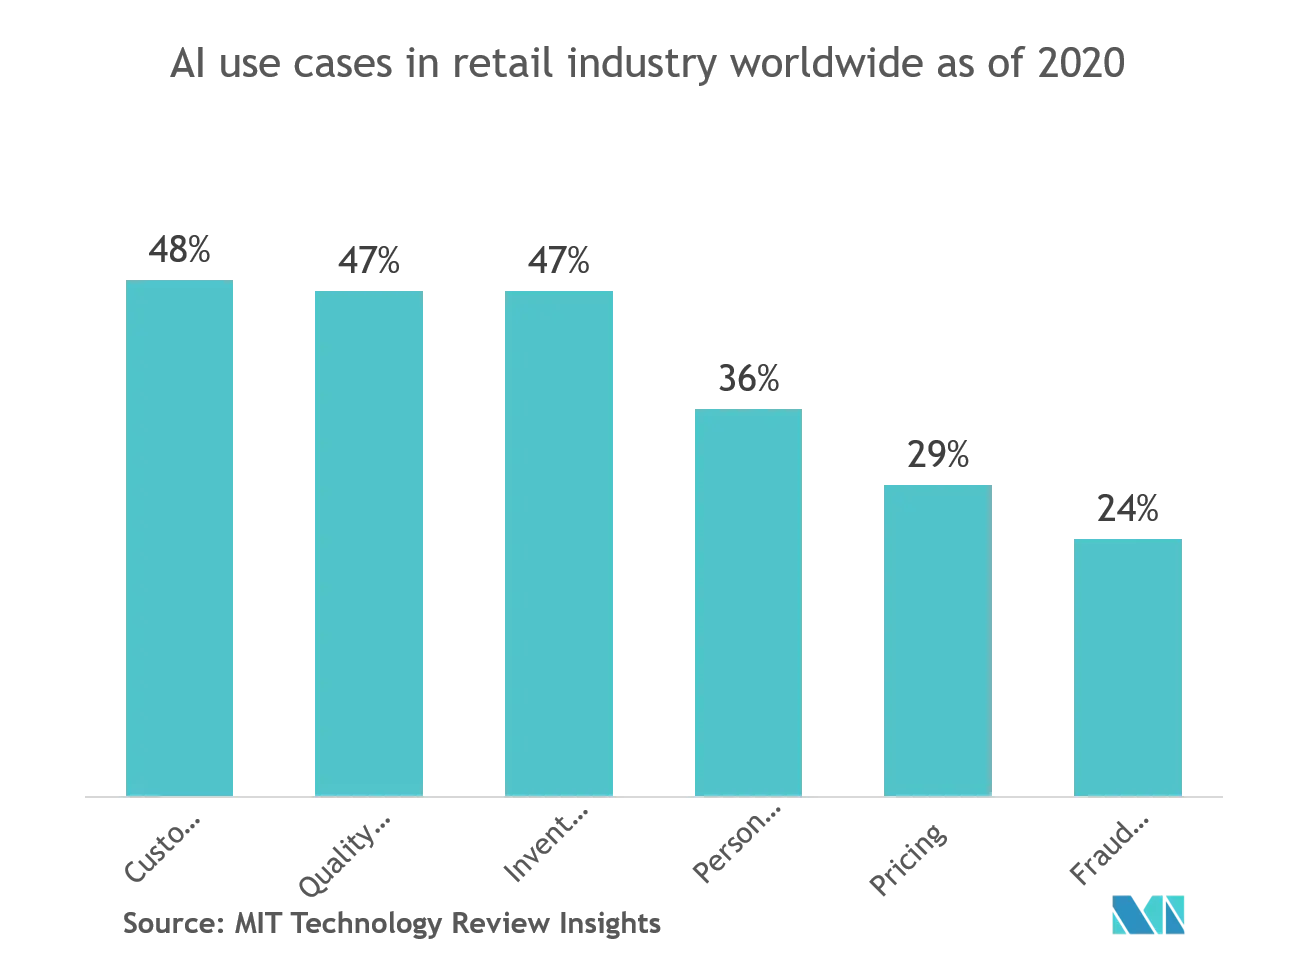 Artificial Intelligence In Retail Market : AI use cases, in retail industry worldwide as of 2020